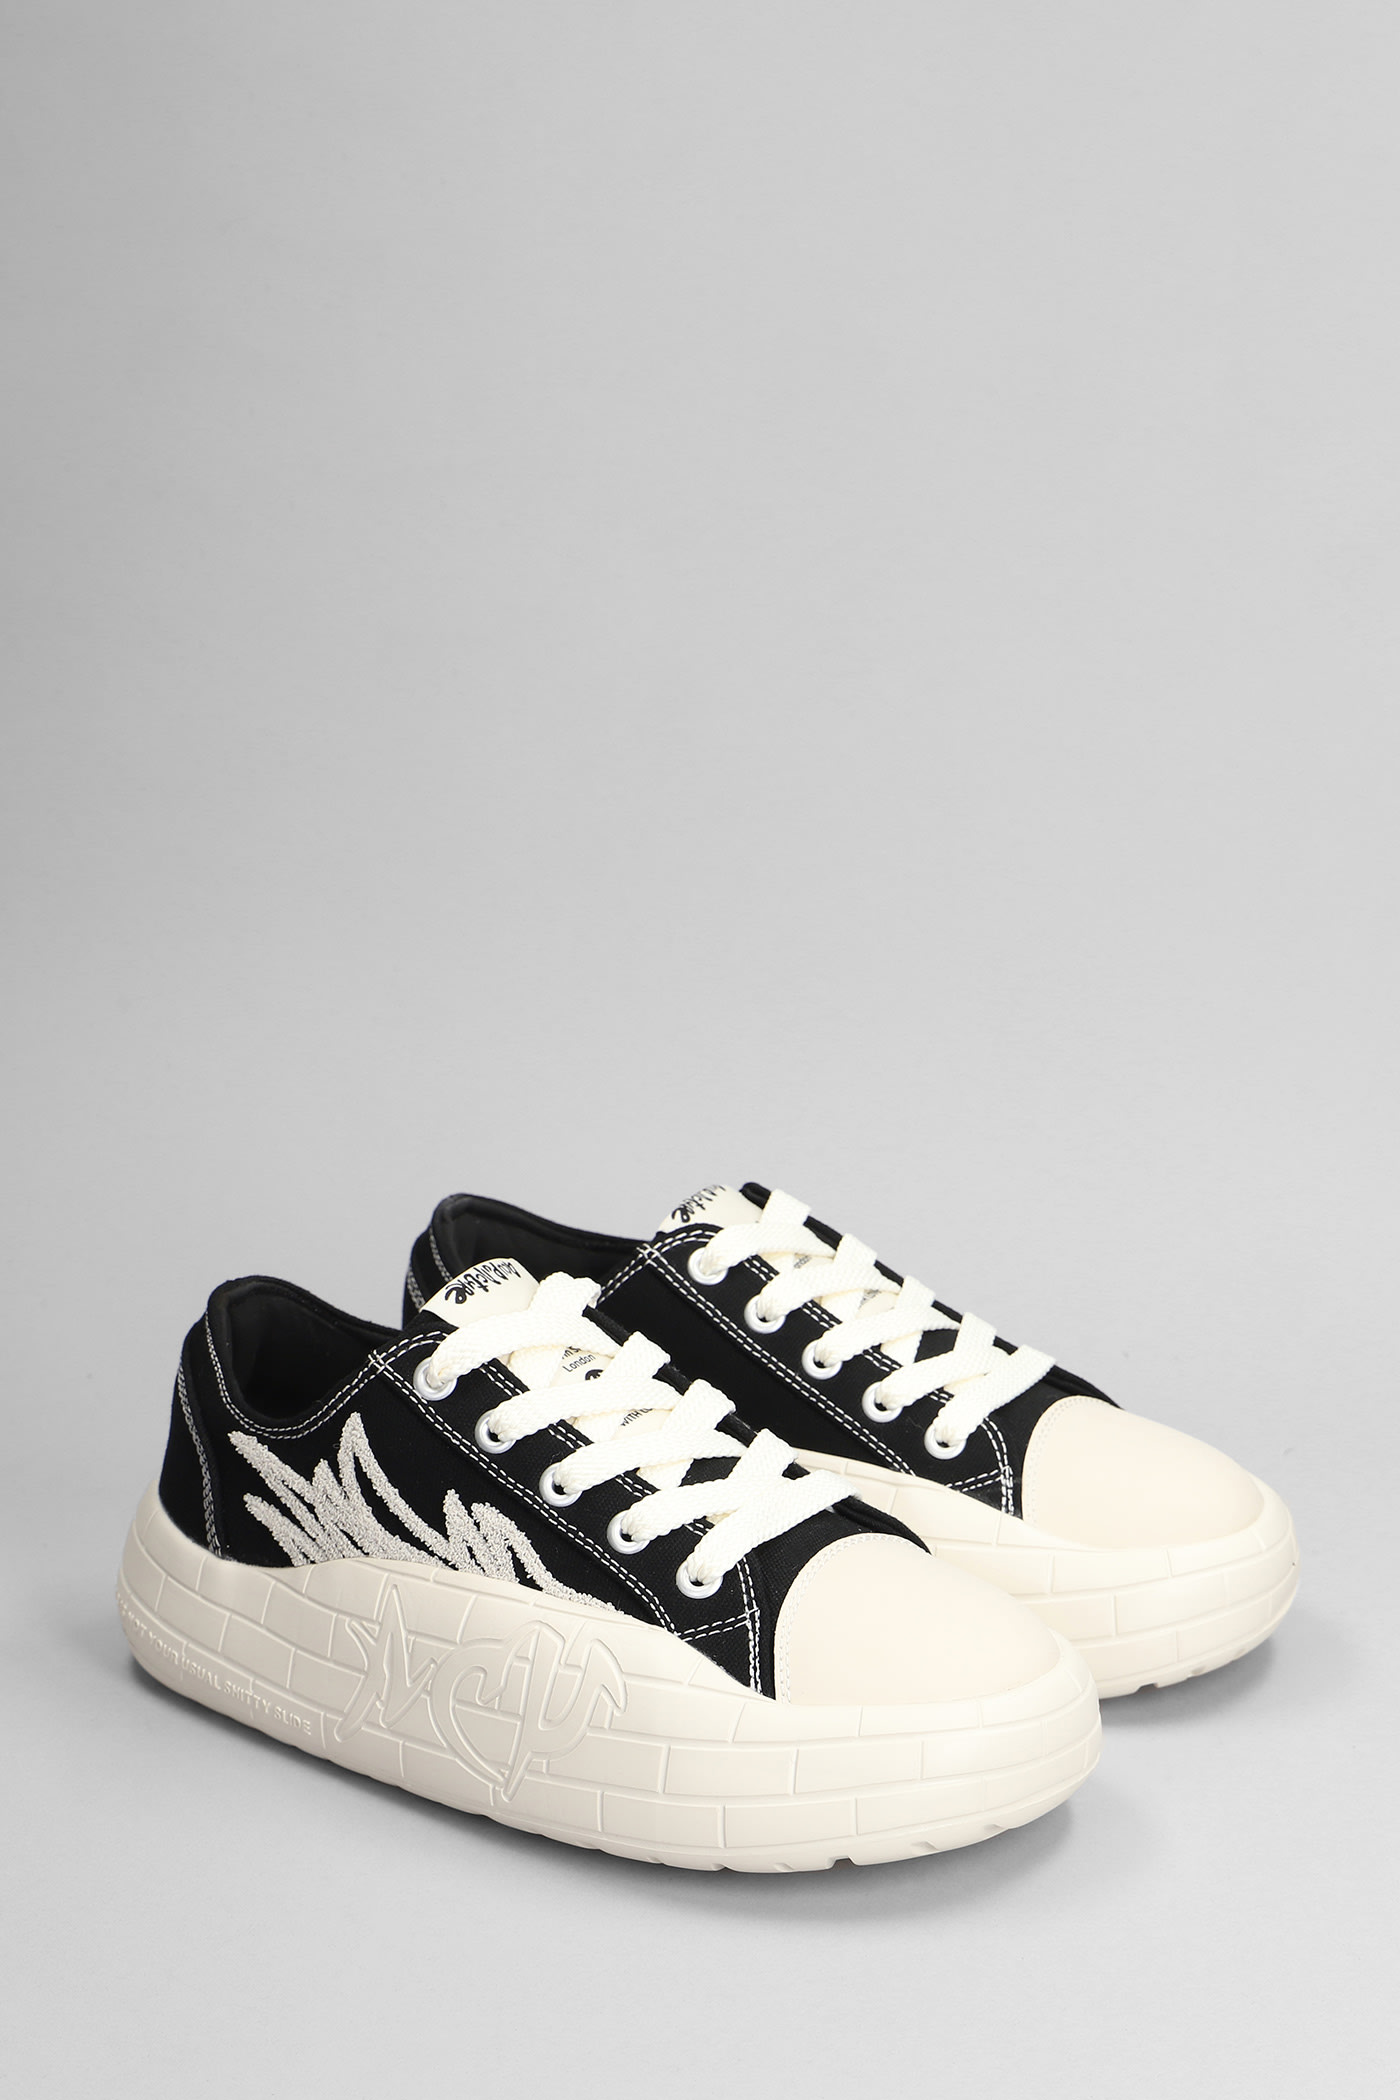 Shop Acupuncture Nyu Vulc G2 Sneakers In Black Canvas